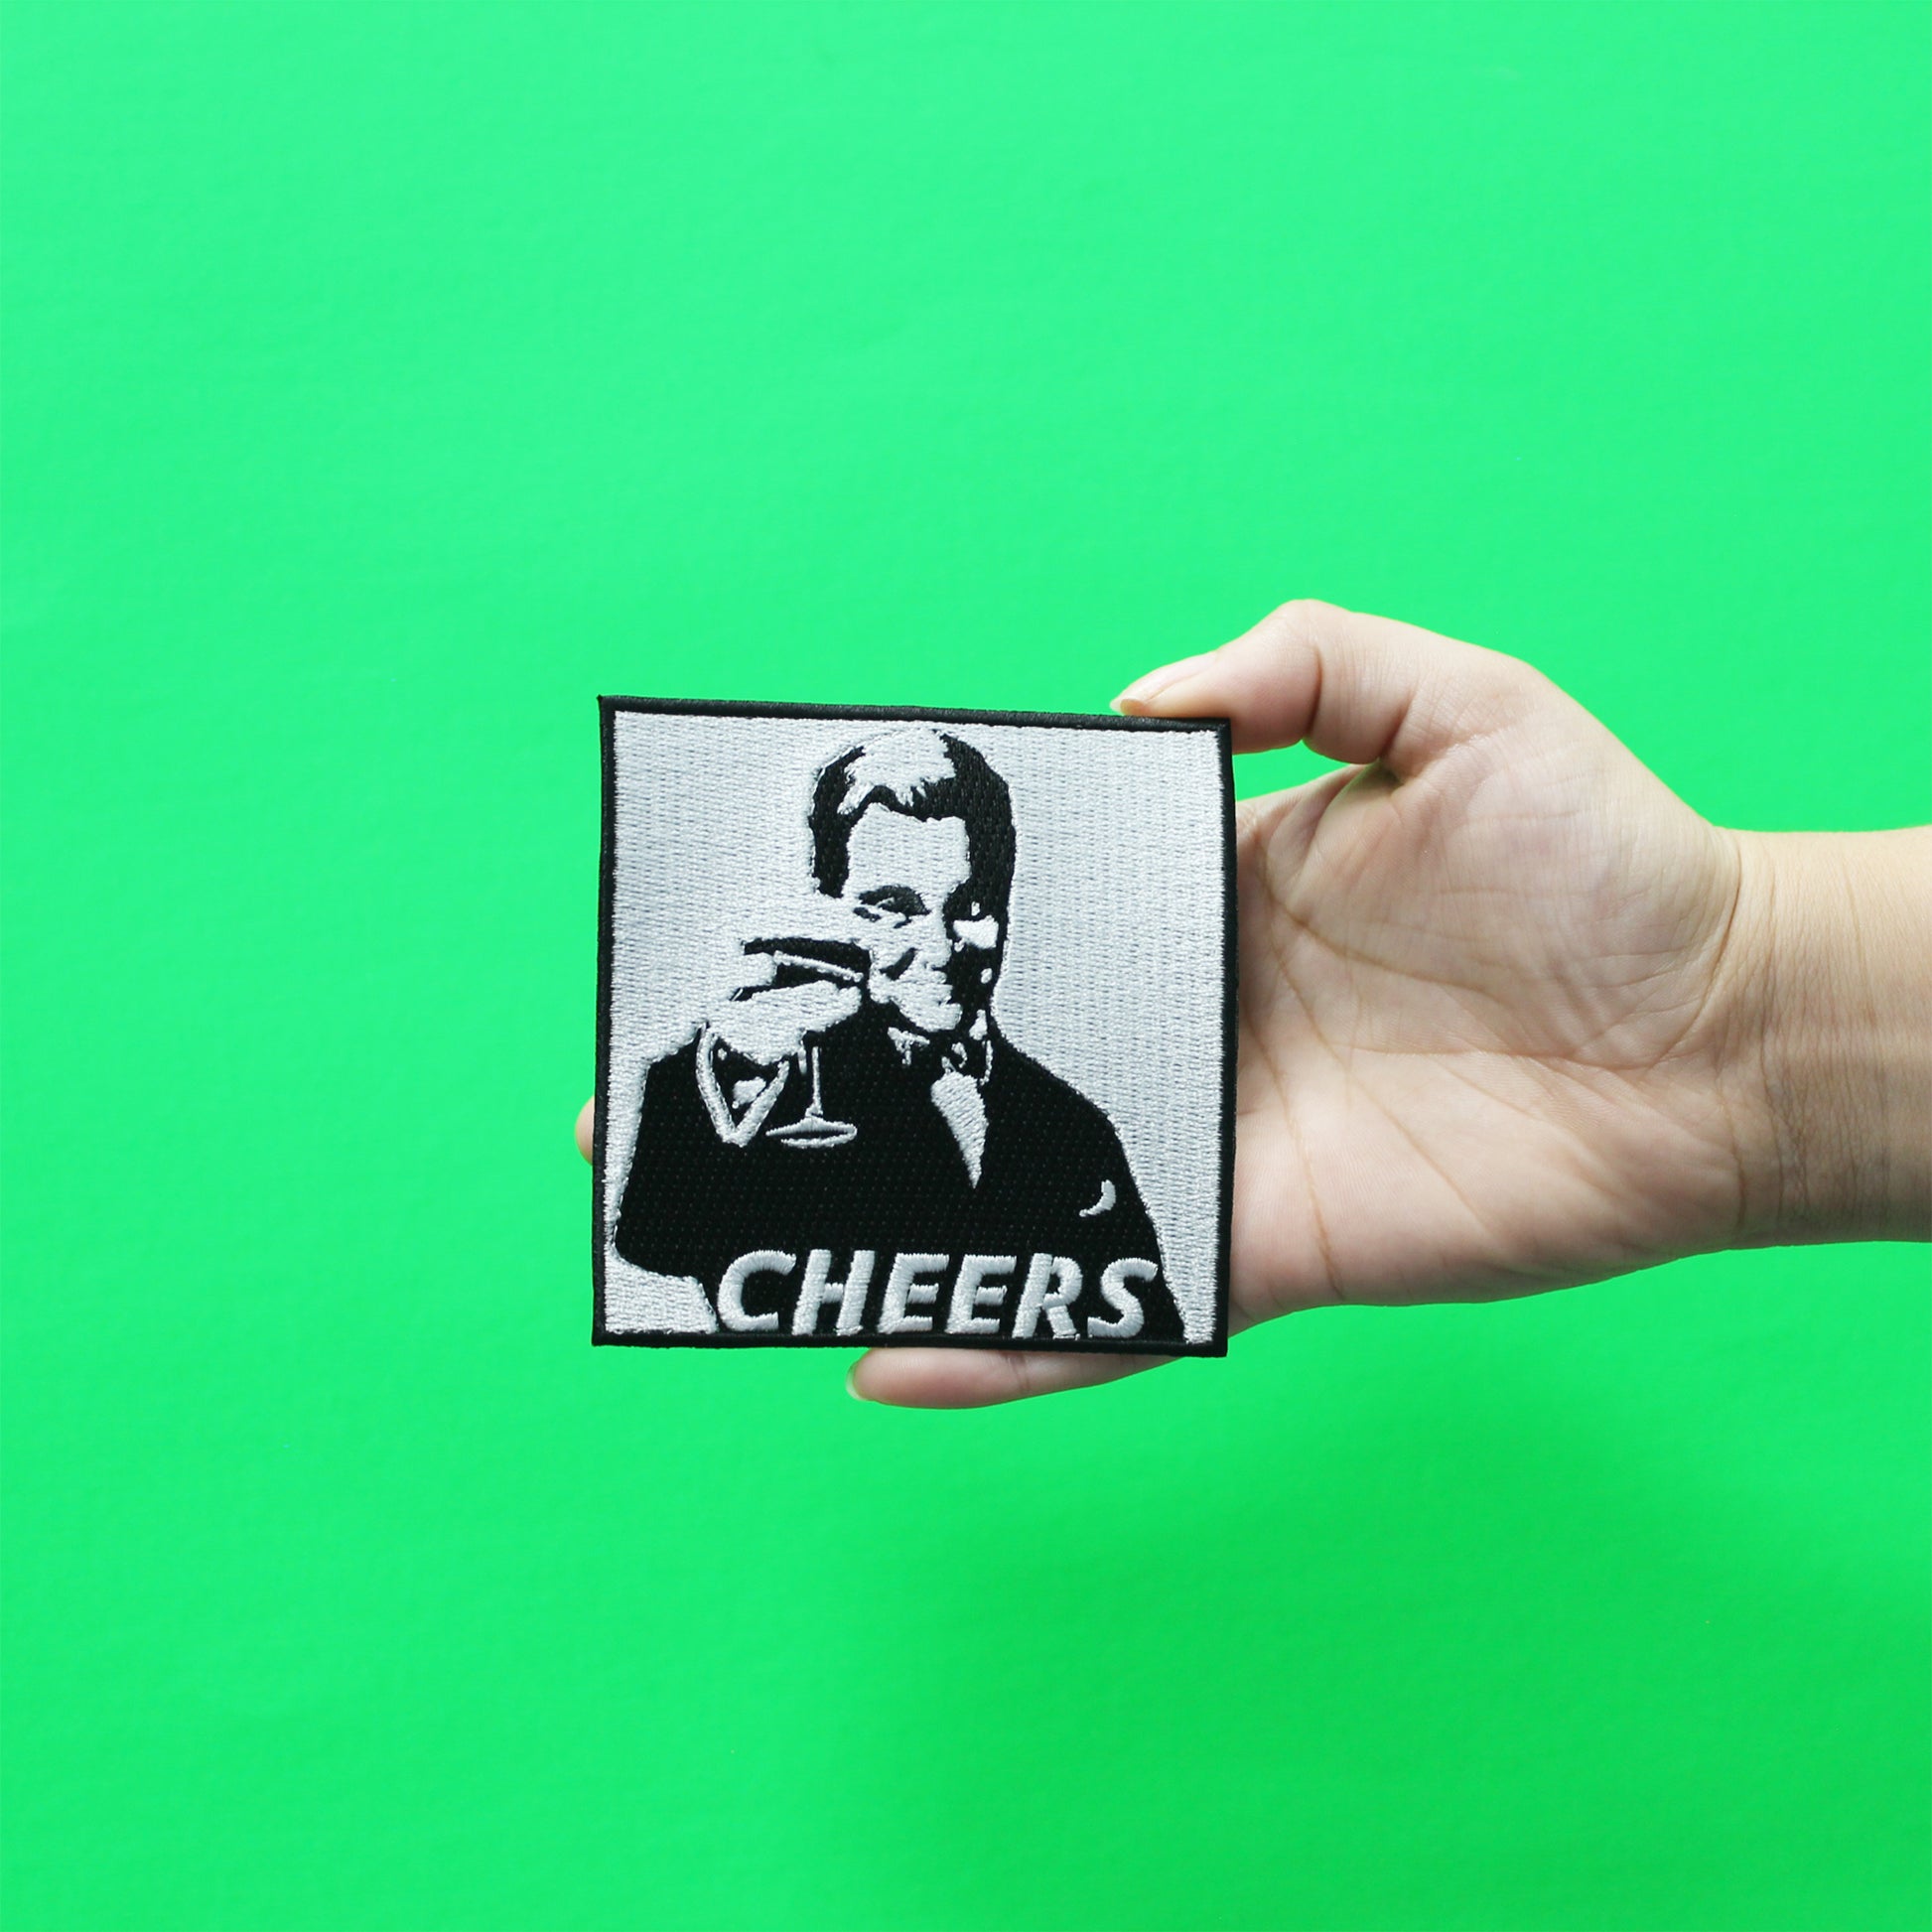 Cheers with Martini Meme Iron On Embroidered Patch 